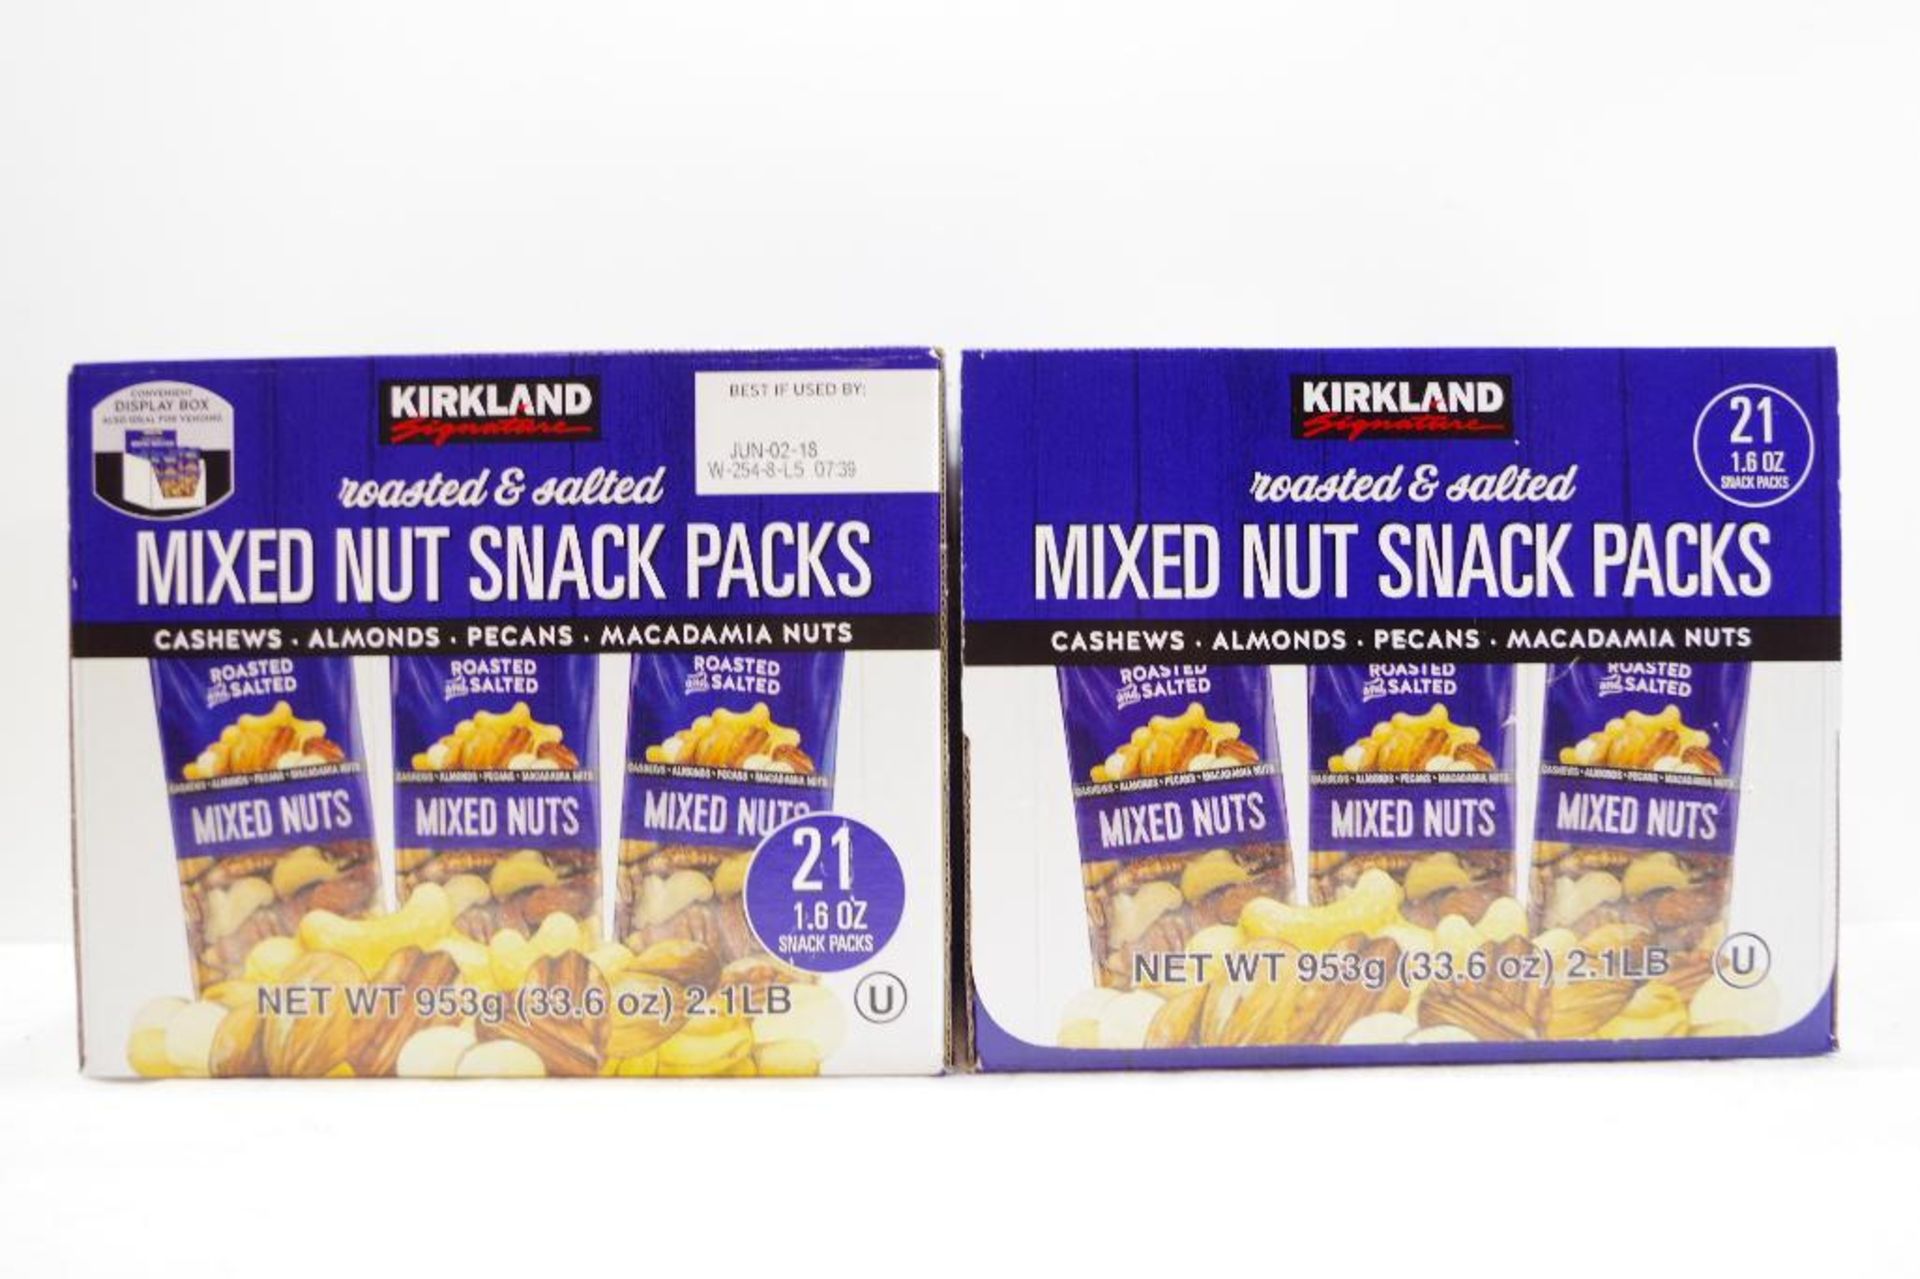 [2] KIRKLAND Roasted & Salted Mixed Nut Snack Boxes